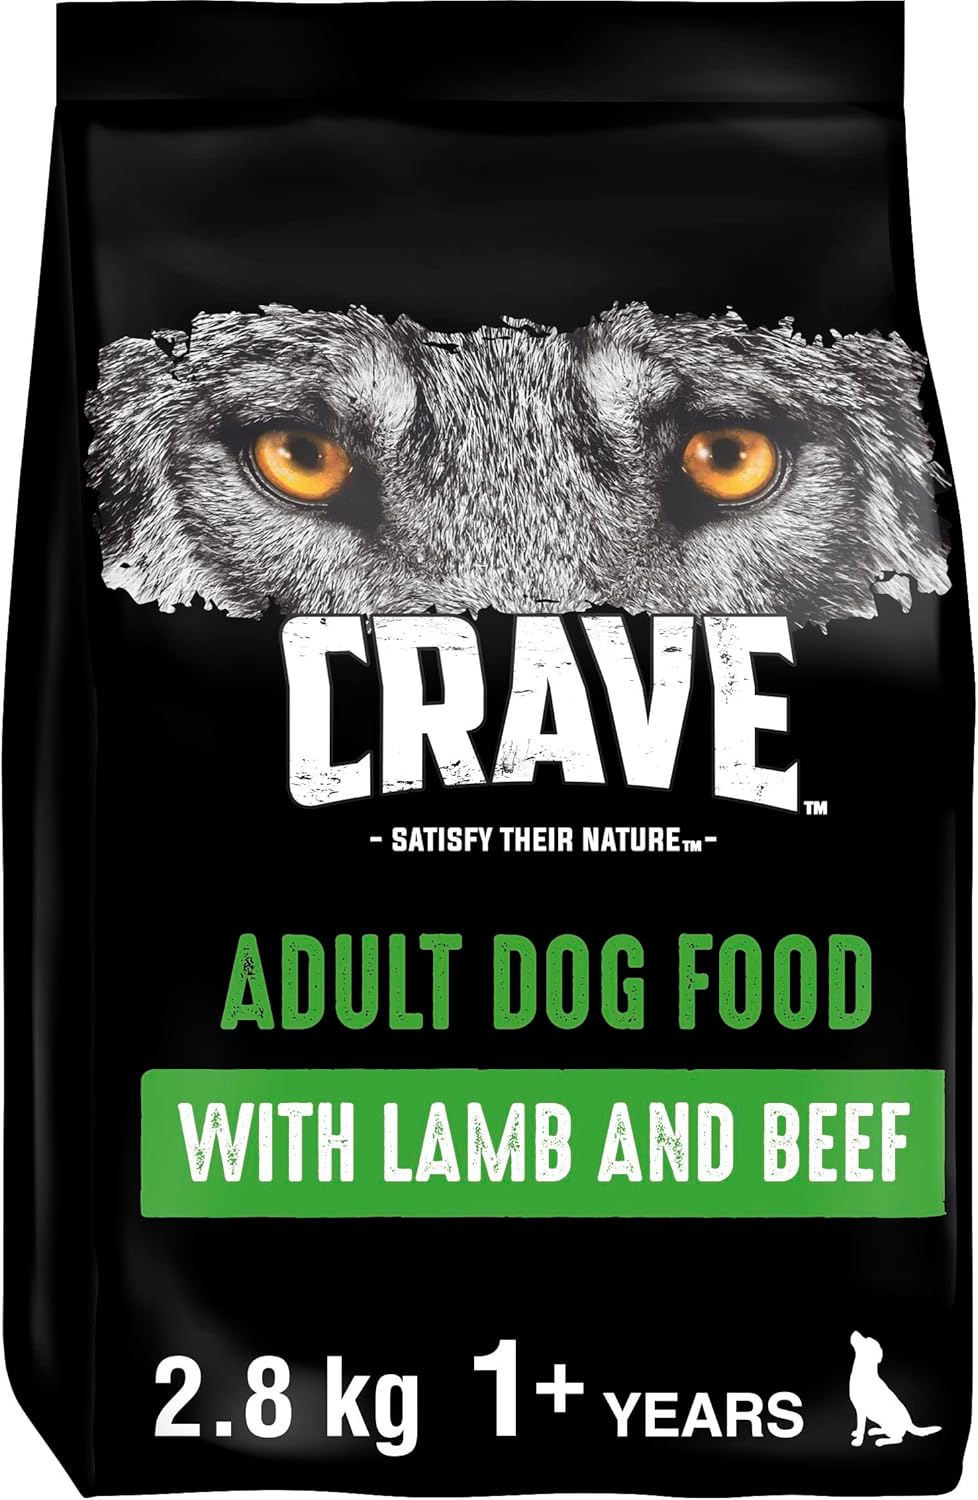 Crave Lamb & Beef 3 x 2.8 kg Bags, Premium Adult Dry Dog Food with high Protein, Grain-free?392435